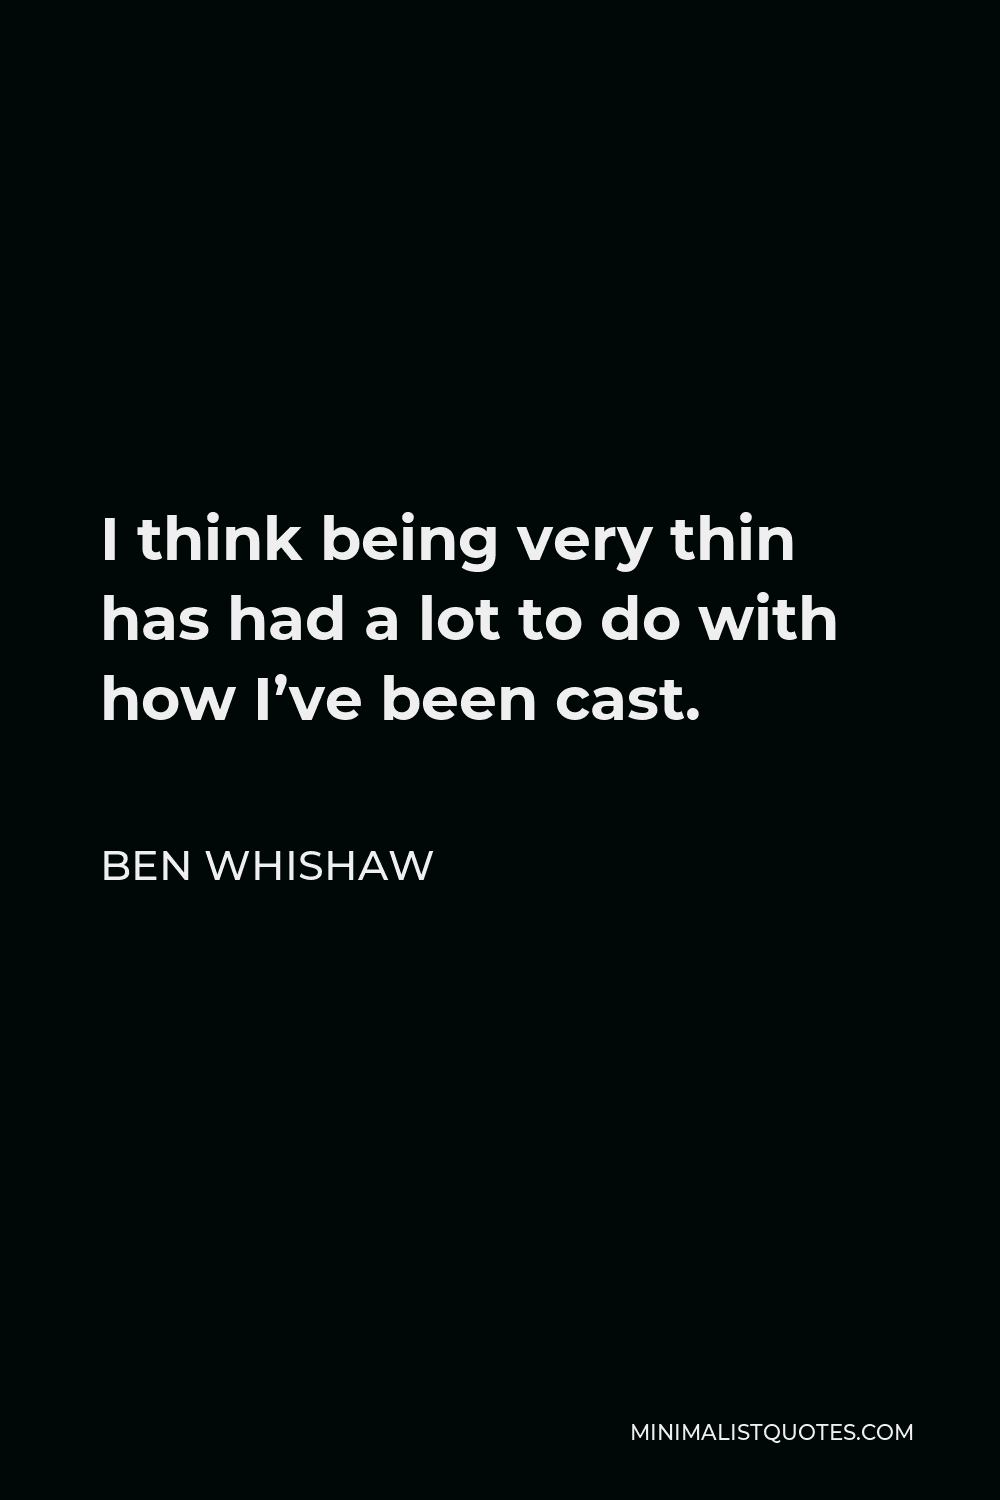 Ben Whishaw Quote - I think being very thin has had a lot to do with how I’ve been cast.